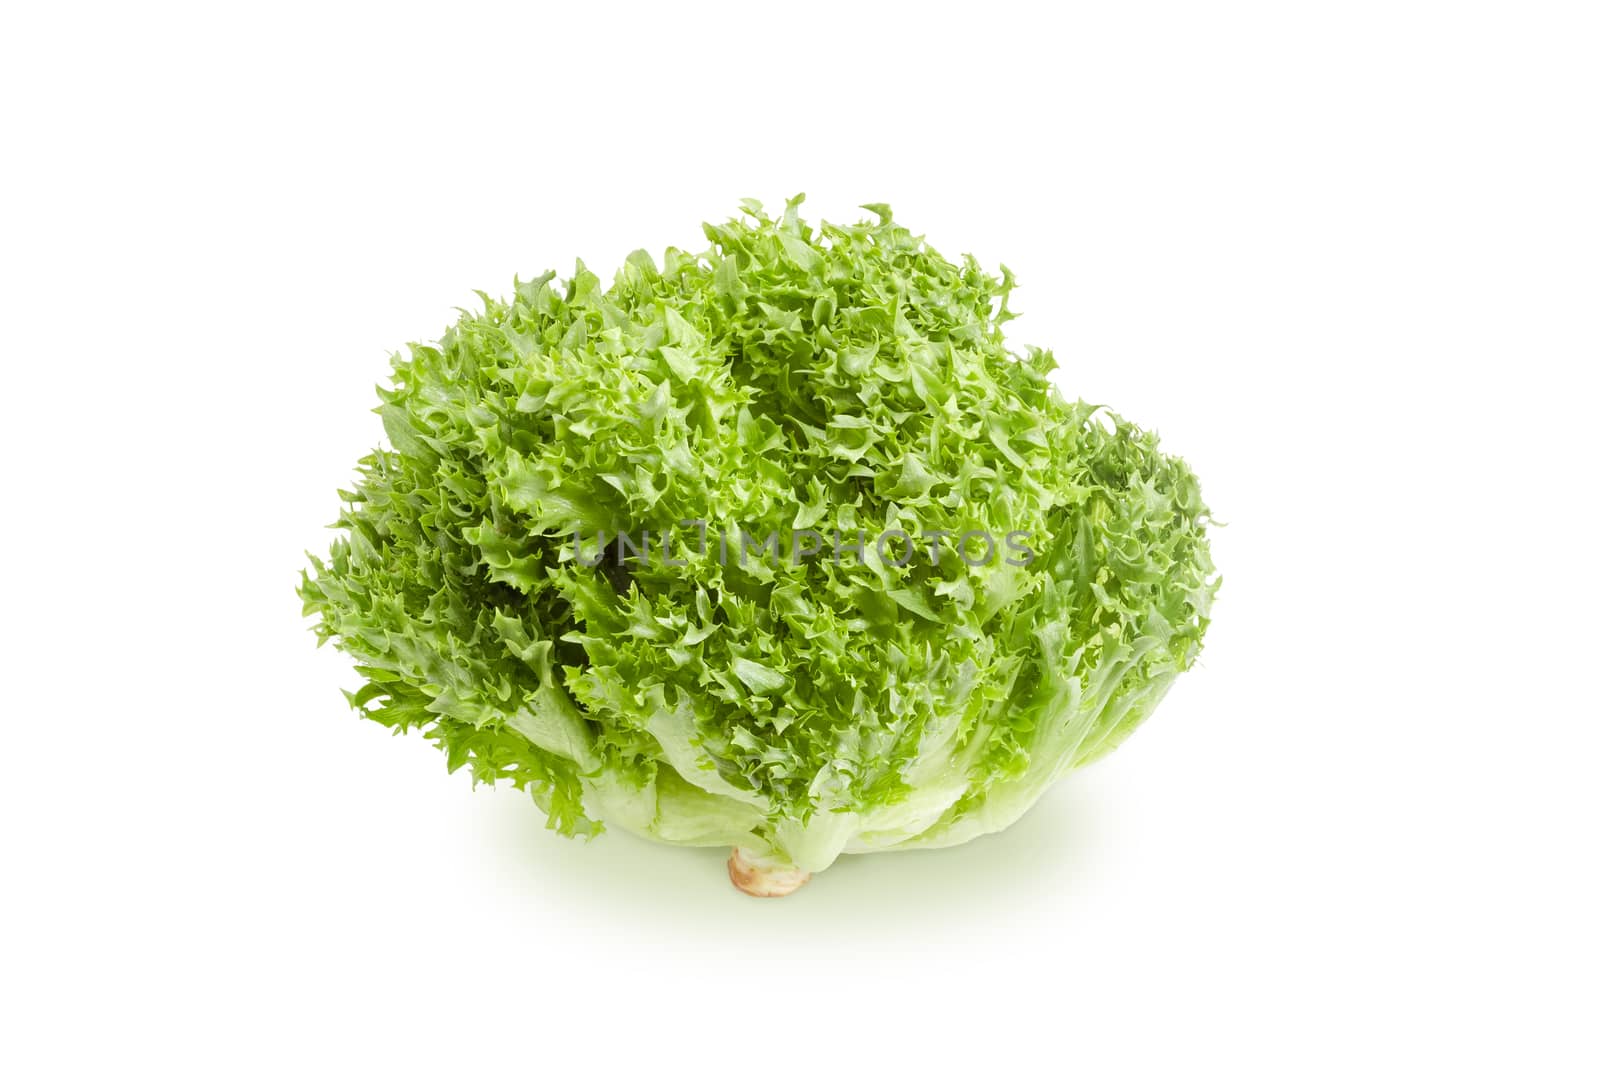 Lettuce head on a white background by anmbph